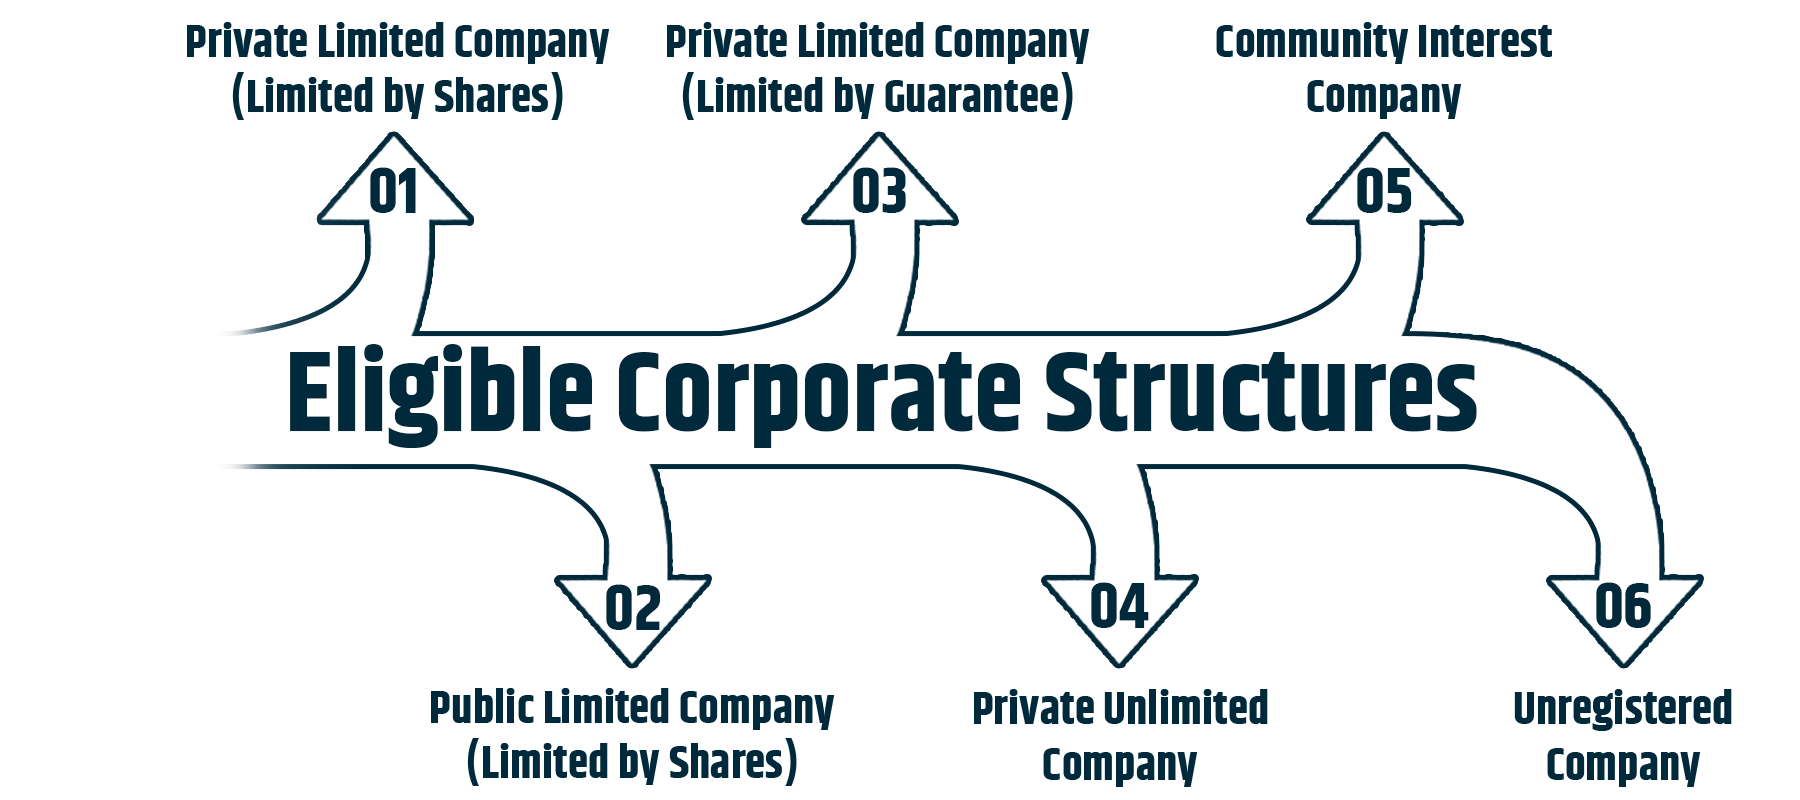 There are six eligible corporate structure 